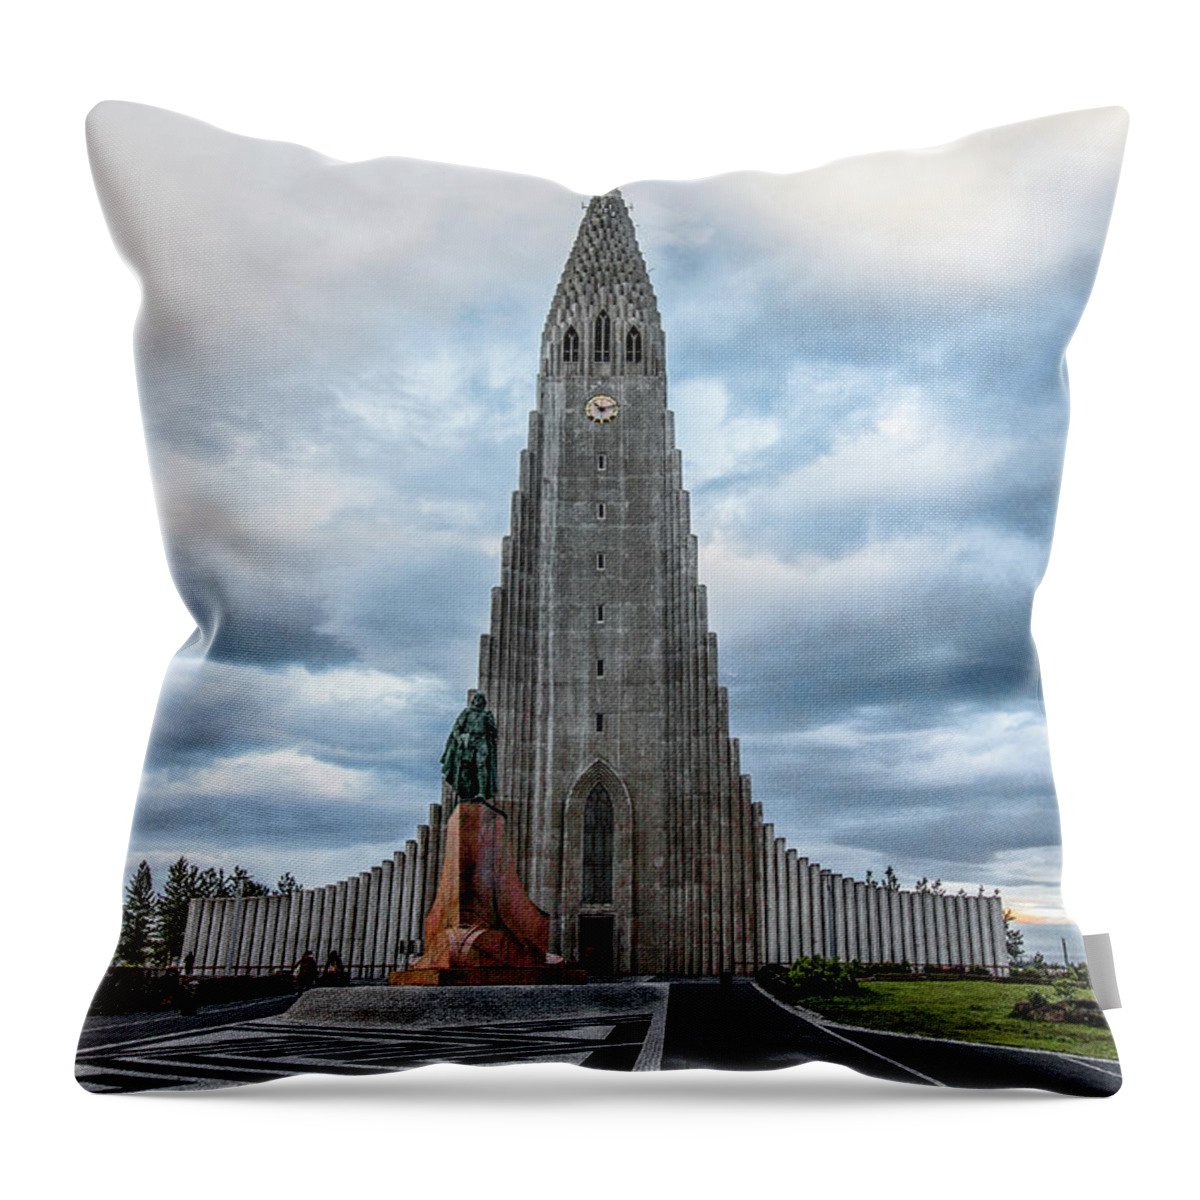 Iceland Throw Pillow featuring the photograph Hallgrimskirkja Lutheran Church, Iceland by Venetia Featherstone-Witty